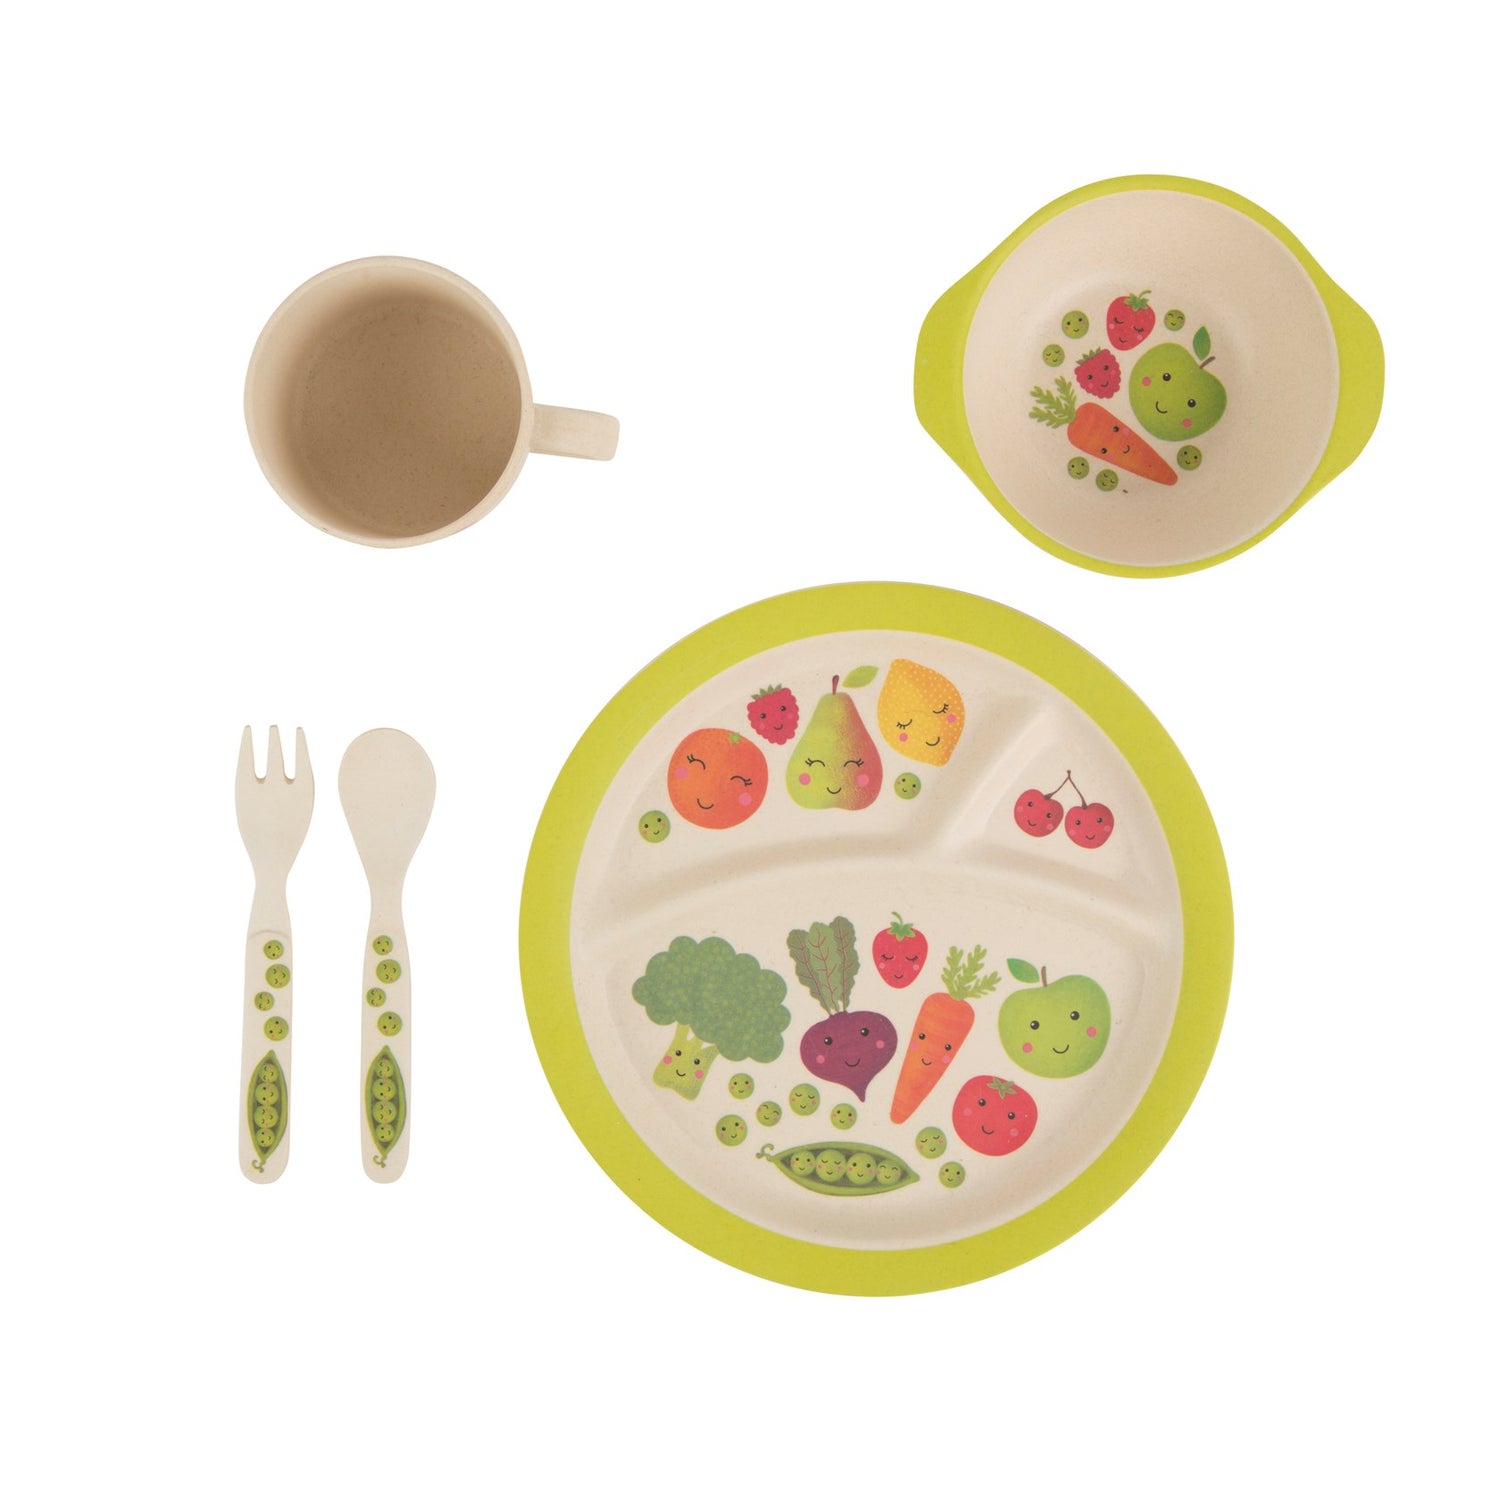 Stay healthy with this gorgeous bamboo plate featuring fun vegetable and fruit characters.